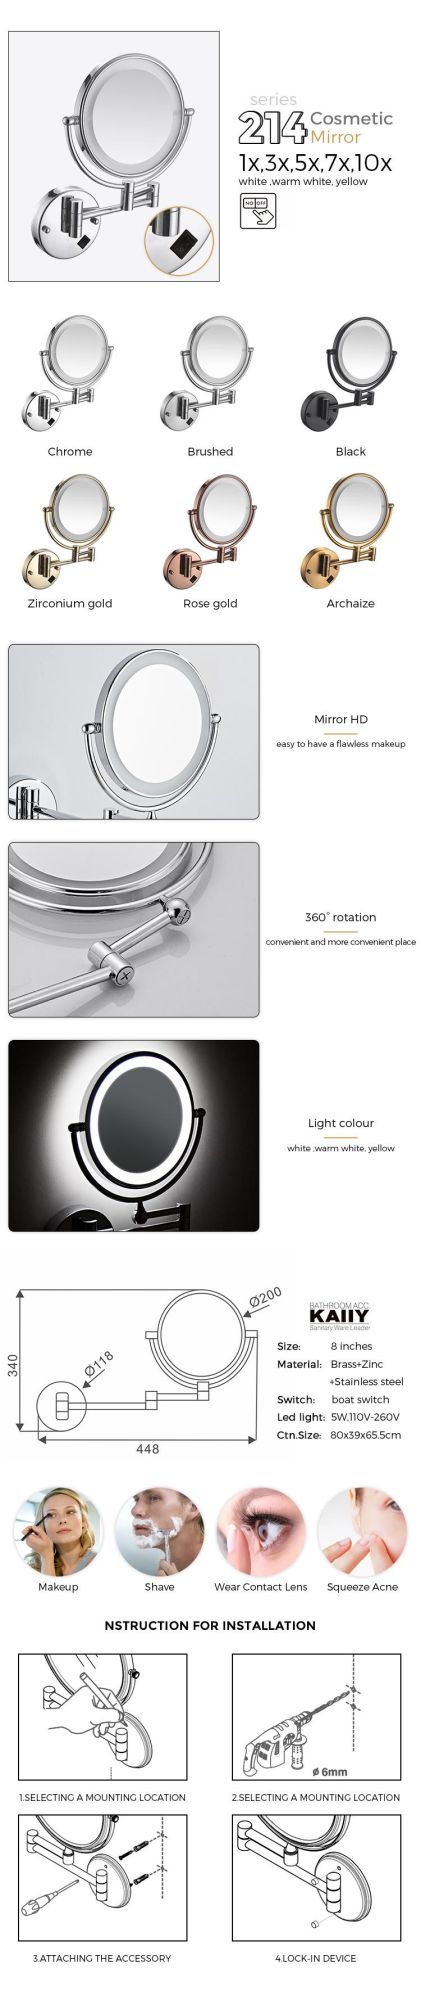 Kaiiy LED Mirror 2face Modern Stainless Steel Bathroom Makeup Mirror for Wall Mounted Bathroom Accessories